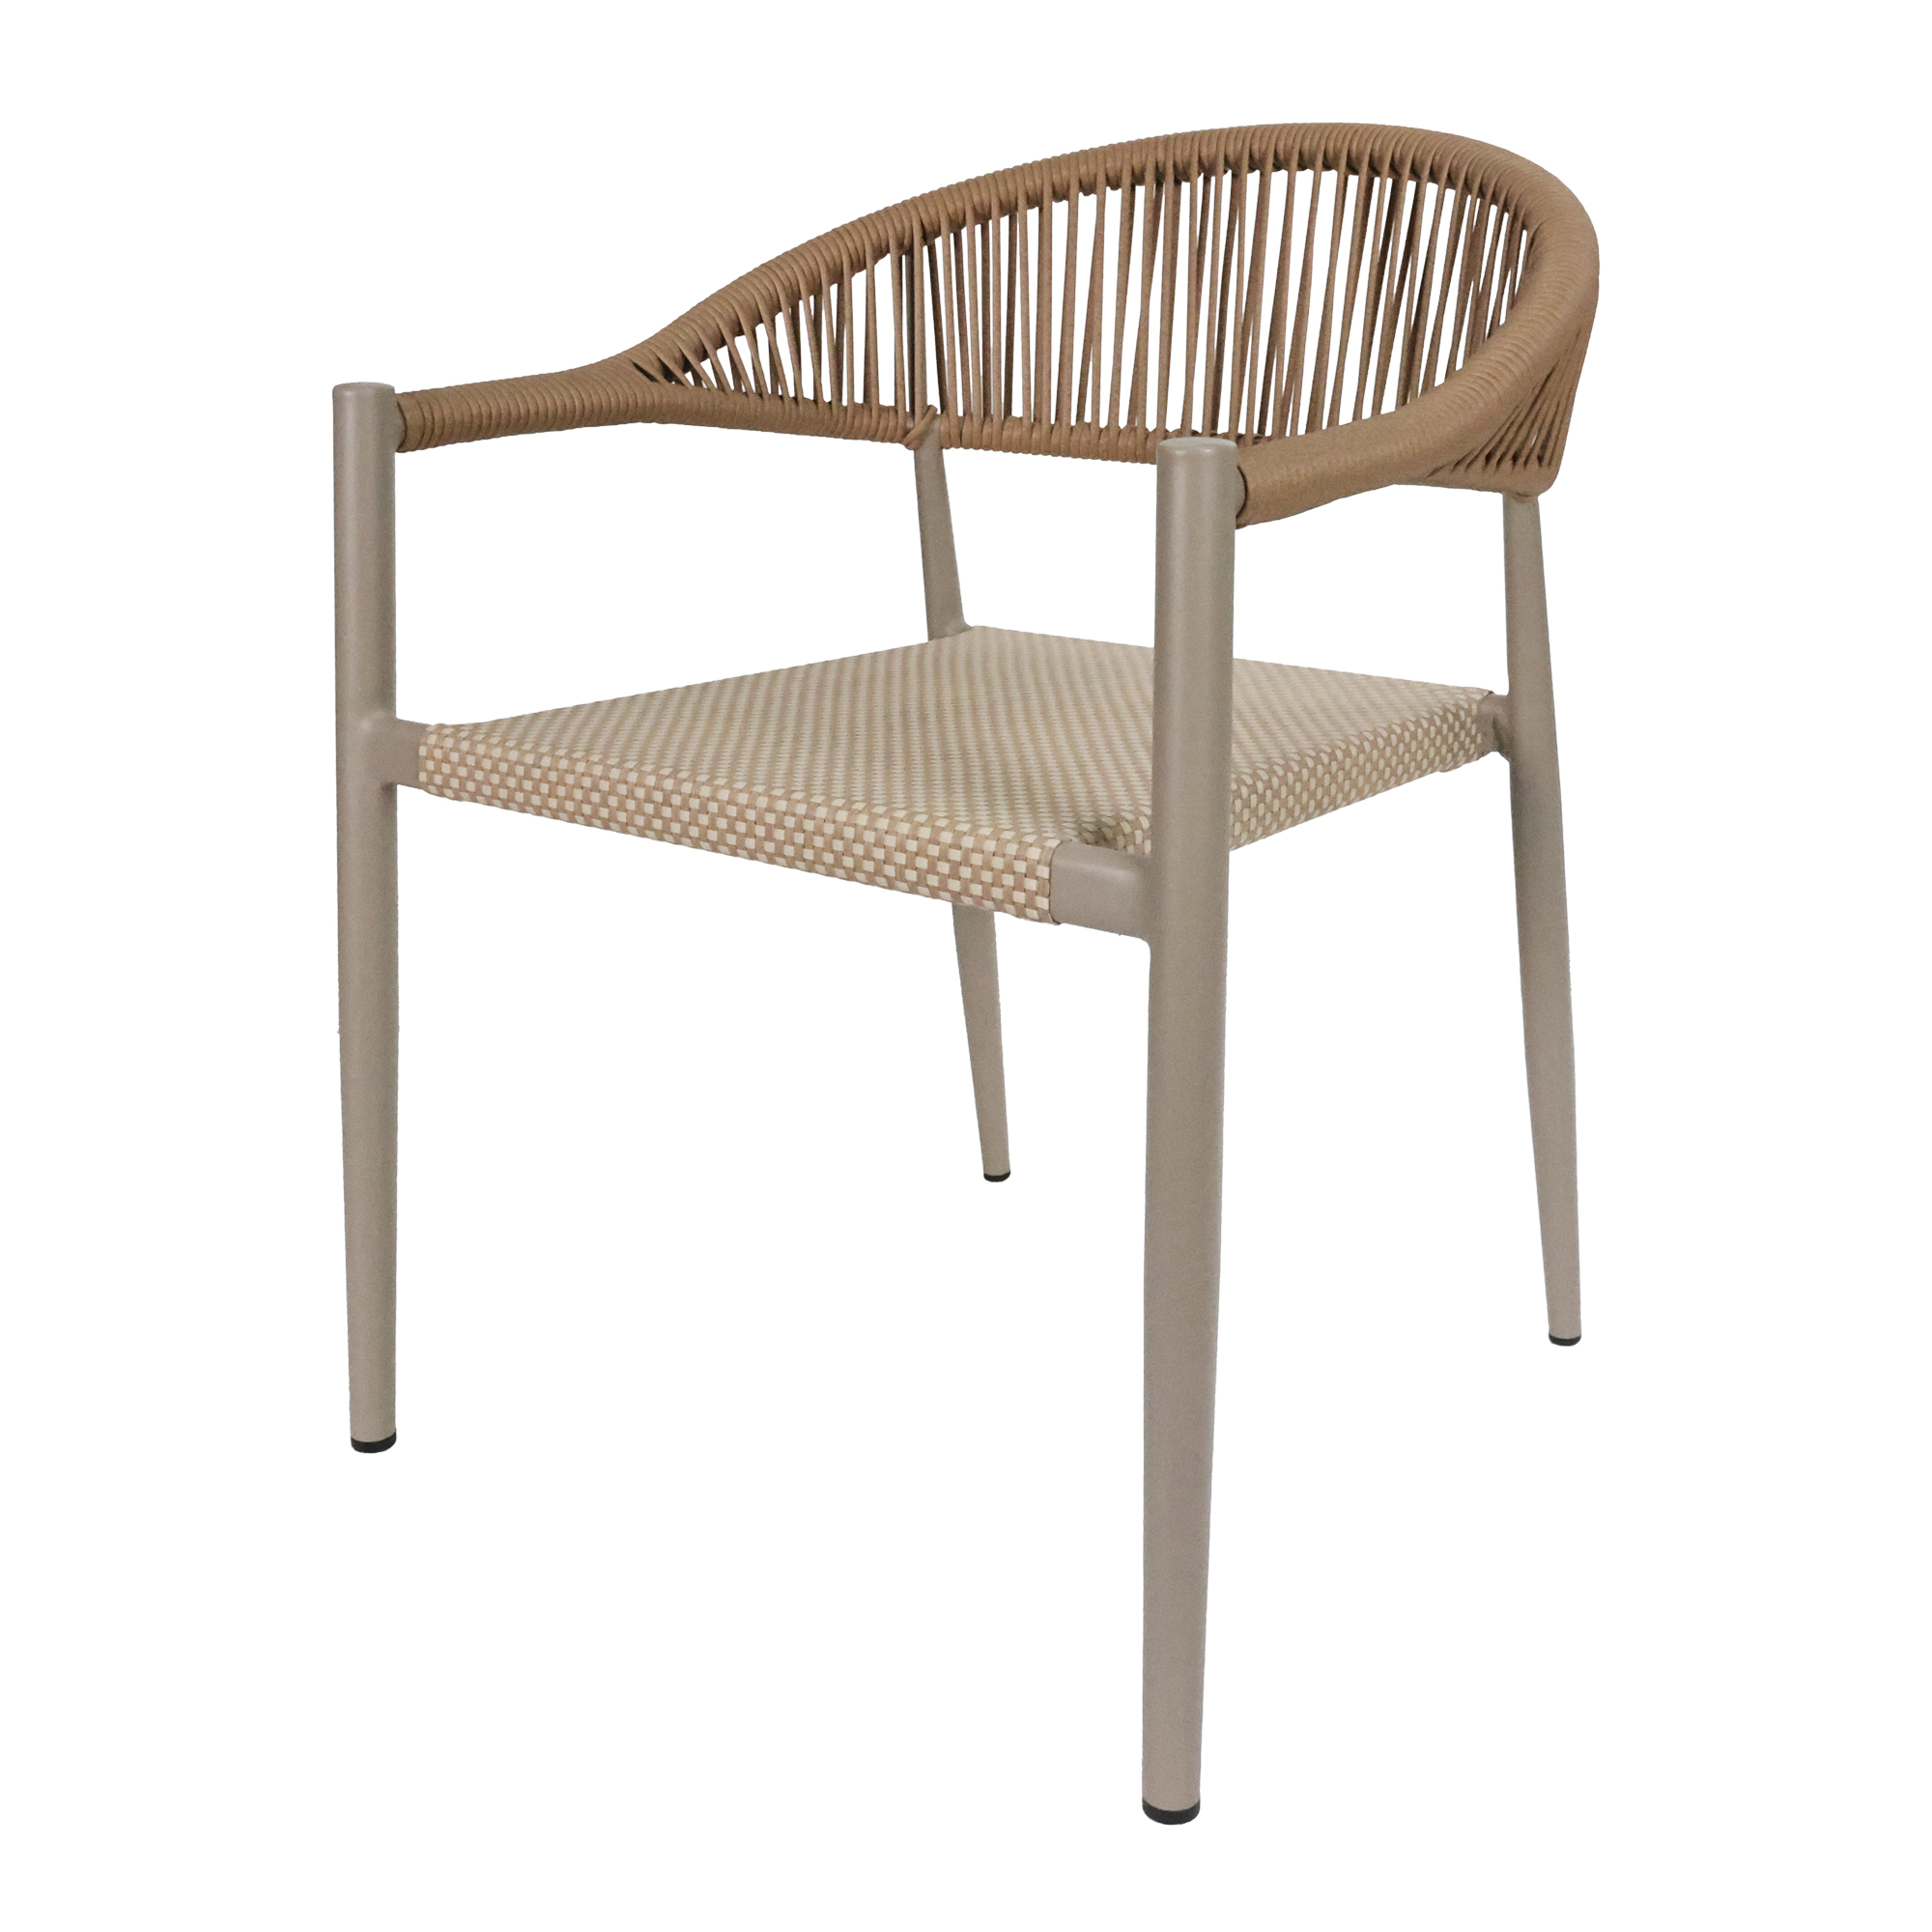 Rattan Outdoor Chairs: The Perfect Combination of Style and Durability